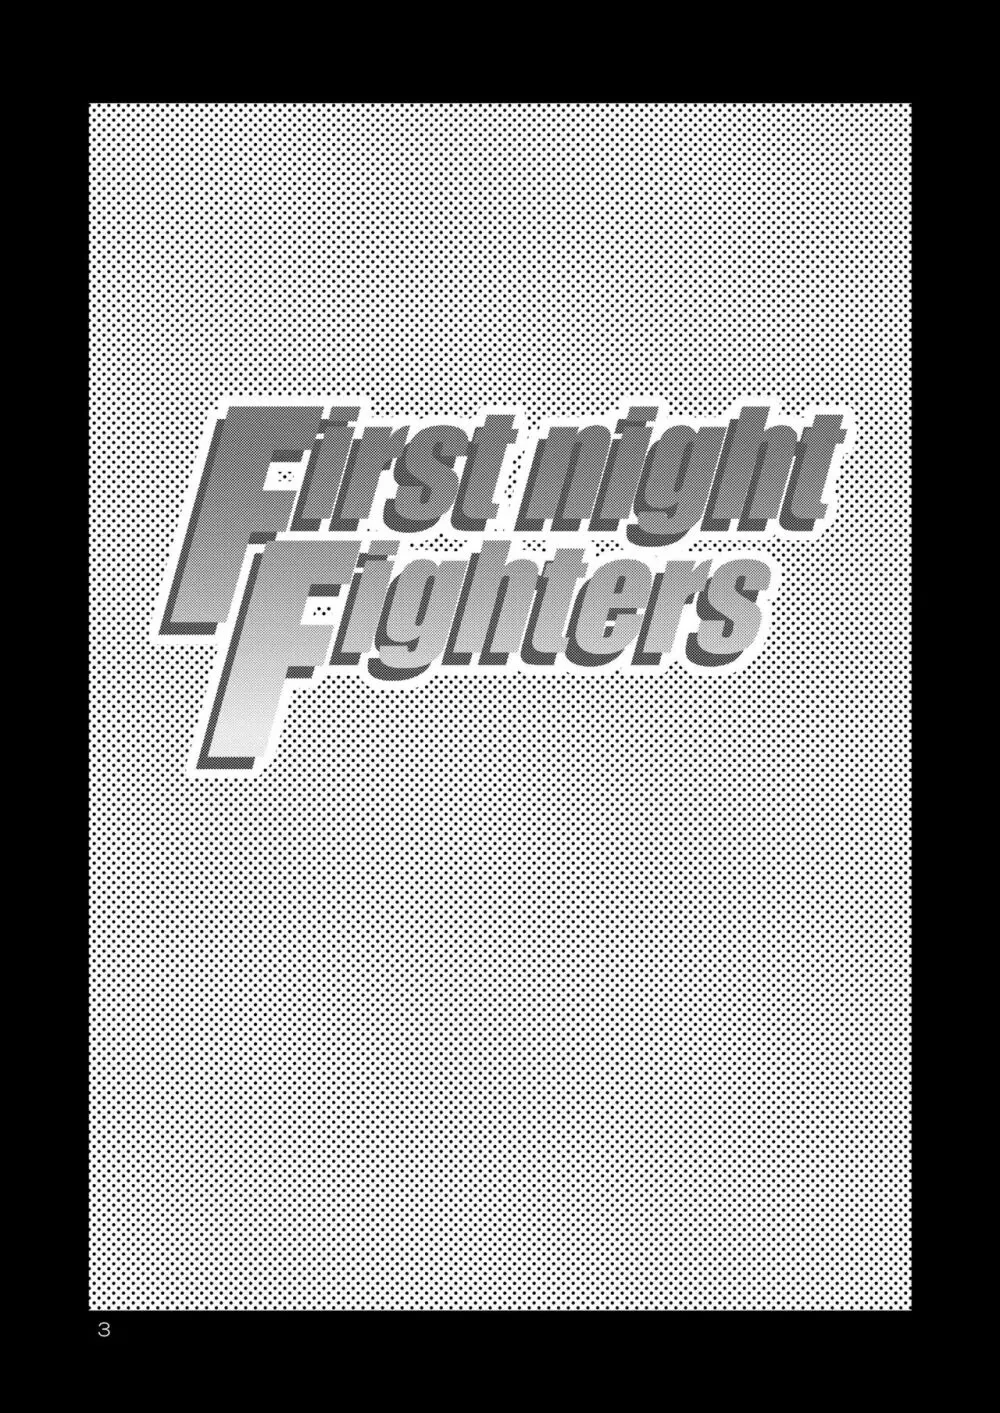 FIrst night Fighters Page.3